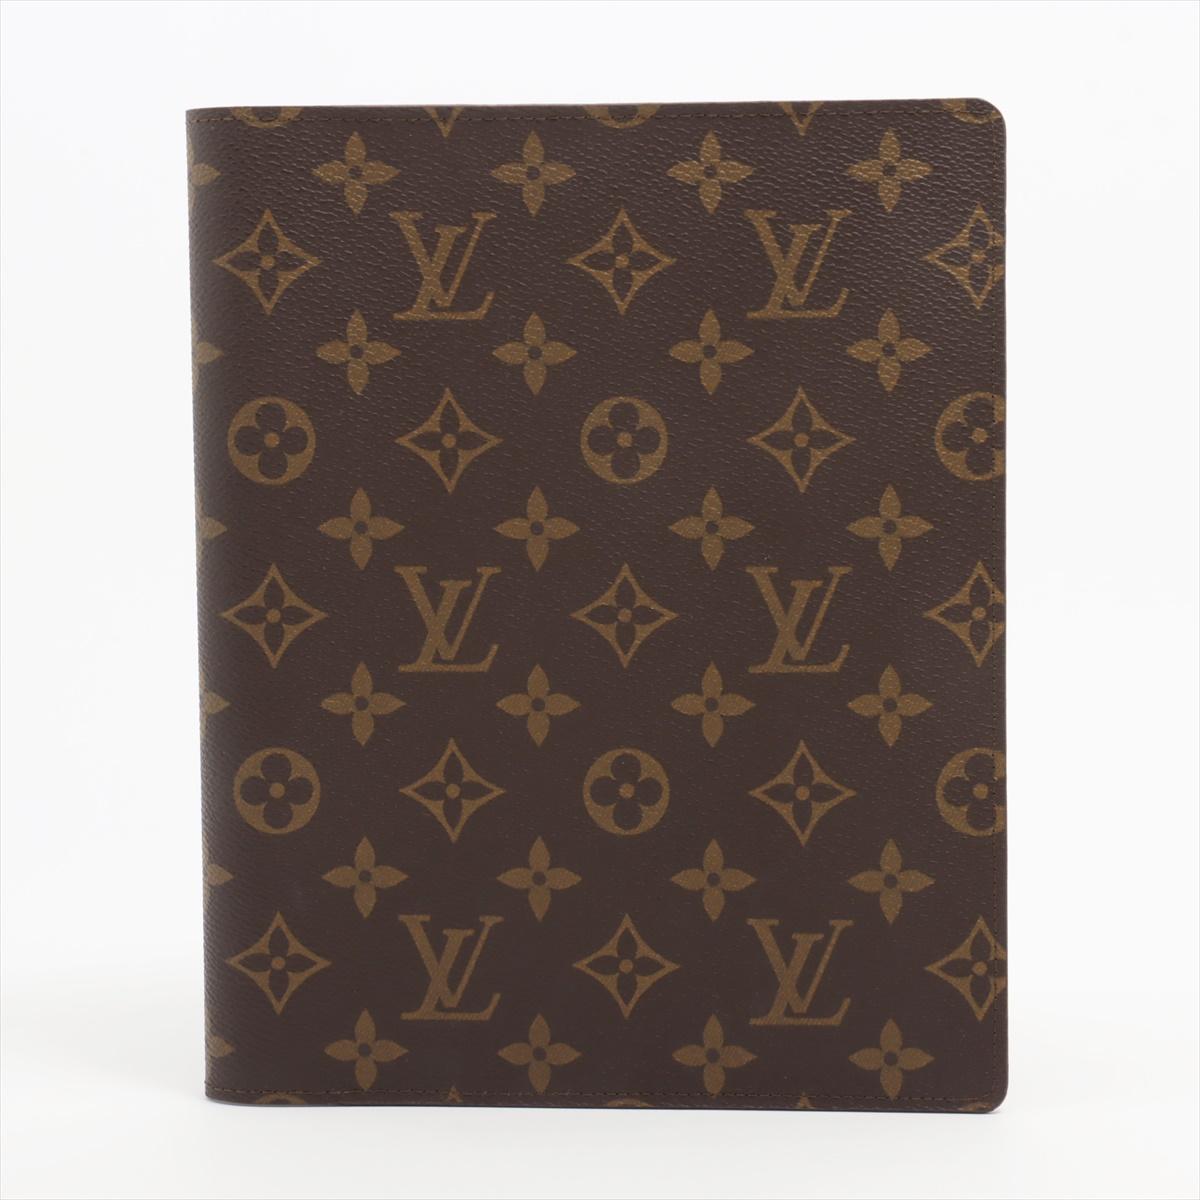 The Louis Vuitton Monogram Agenda Brown Cover with Included Notebook a sophisticated and practical accessory designed for those who appreciate both style and organization. The agenda cover features the iconic Monogram canvas in a rich brown hue,